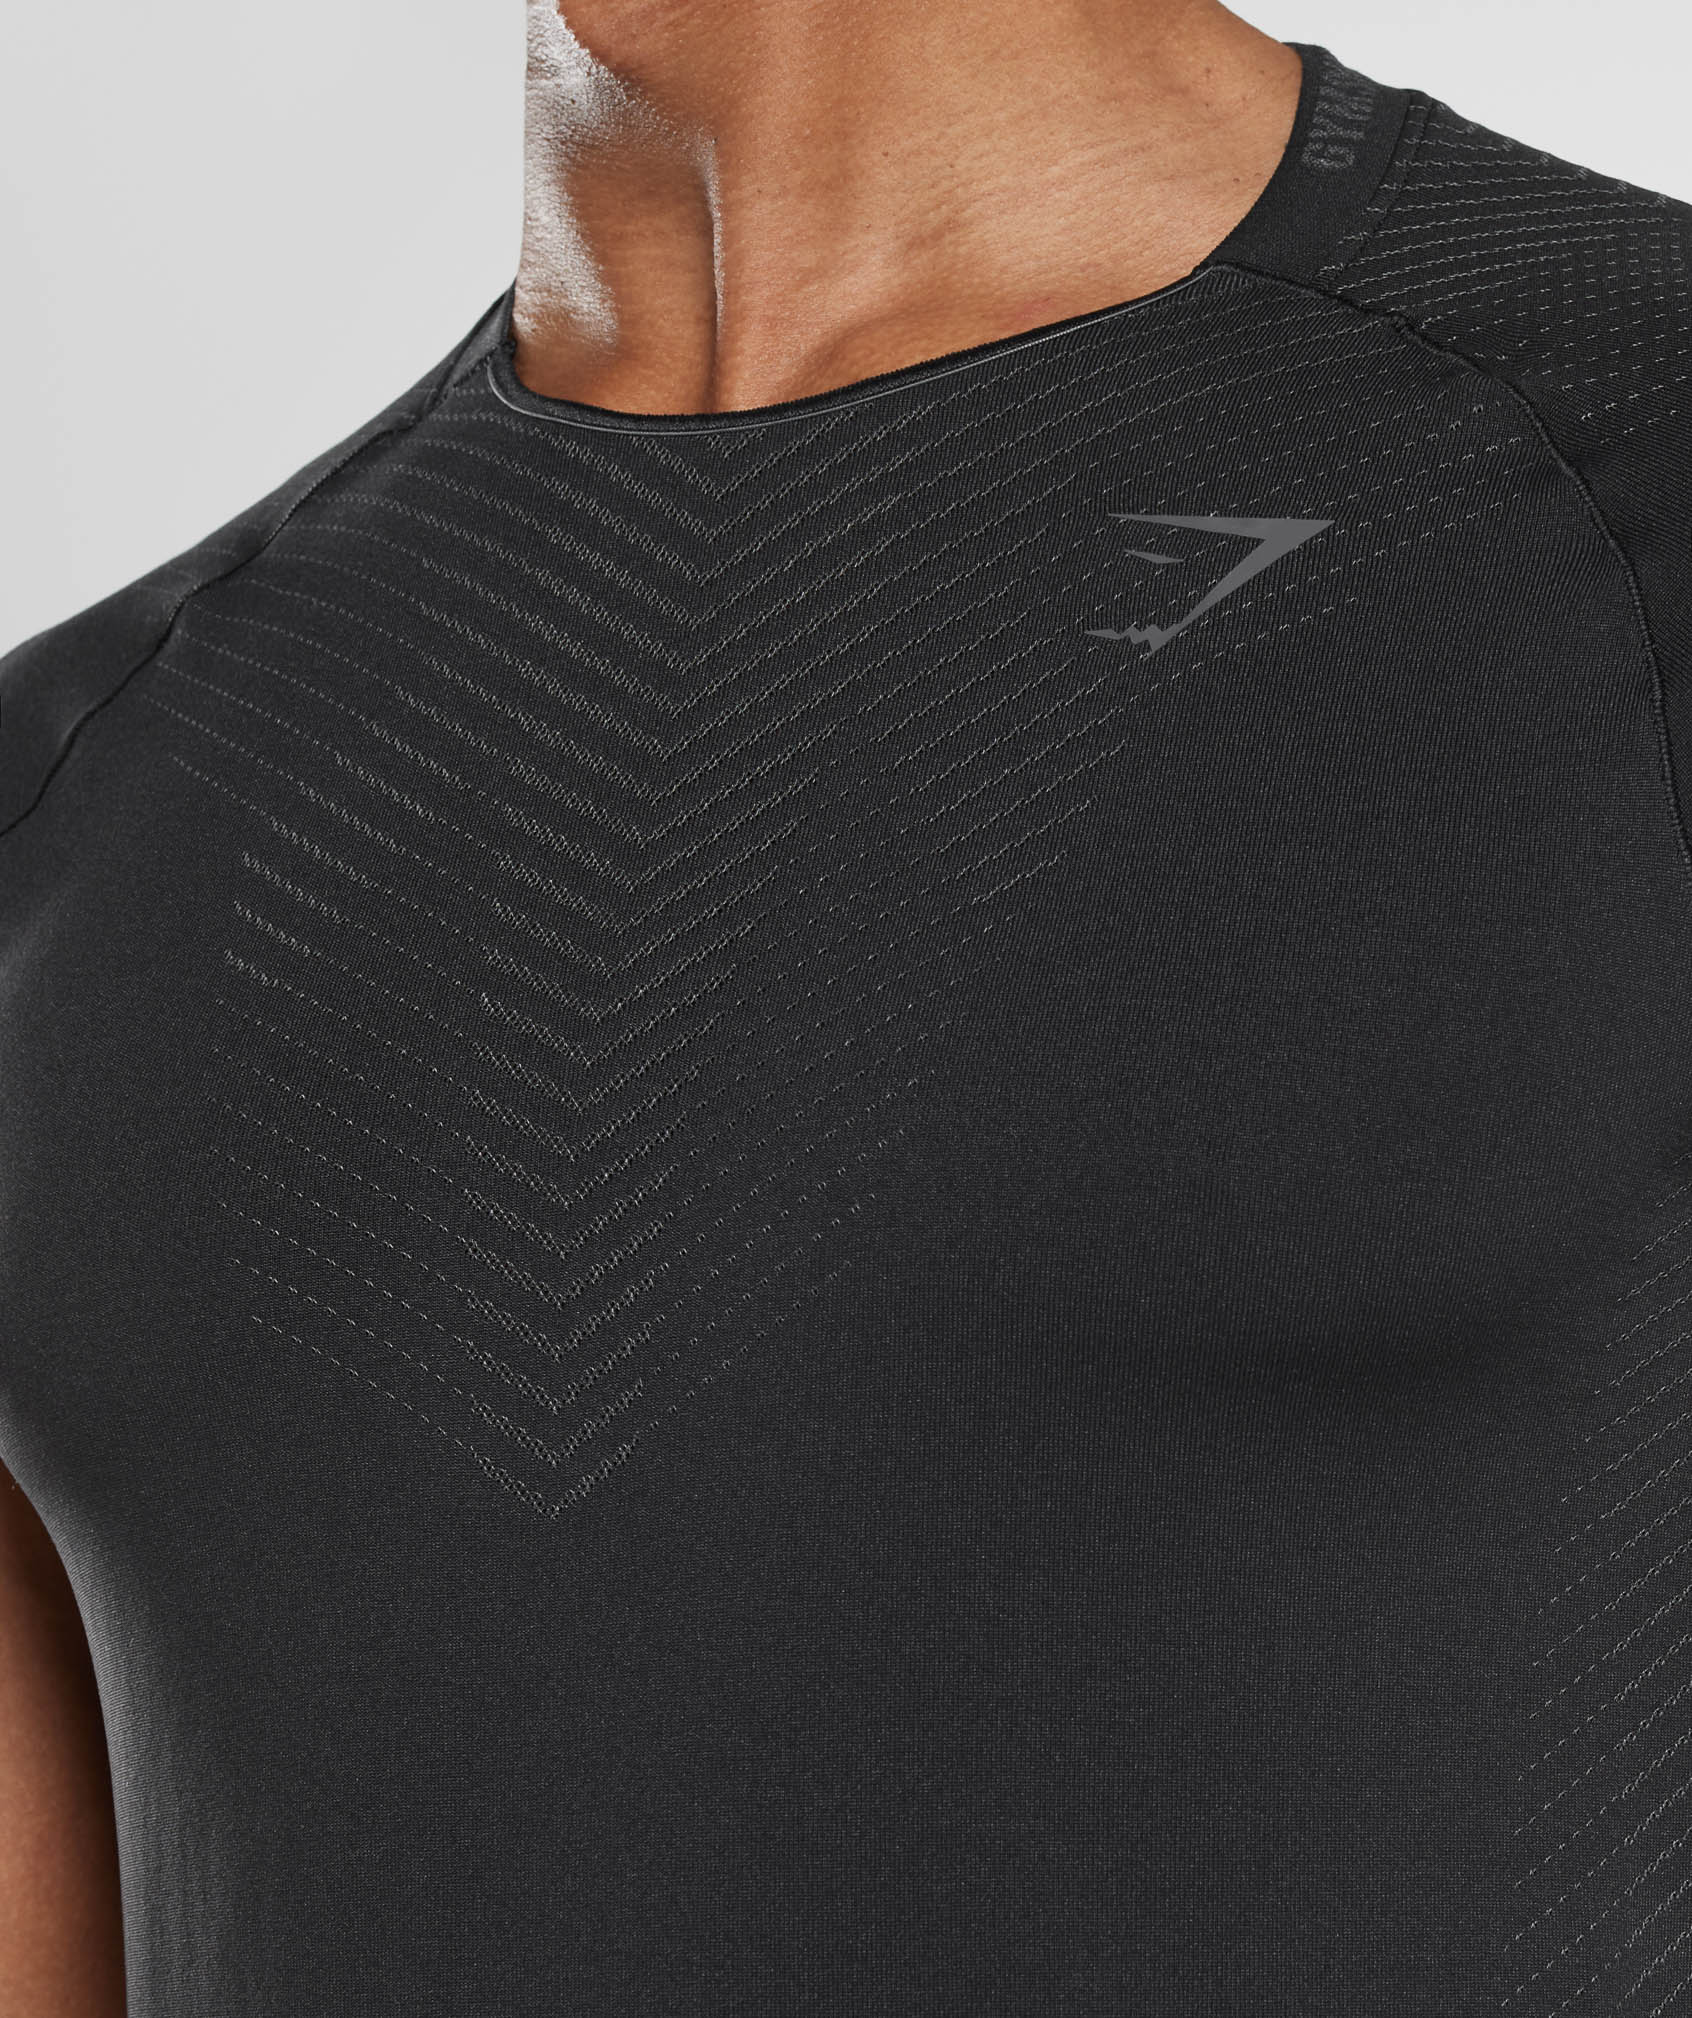 Apex Seamless T-Shirt in Black/Silhouette Grey - view 5